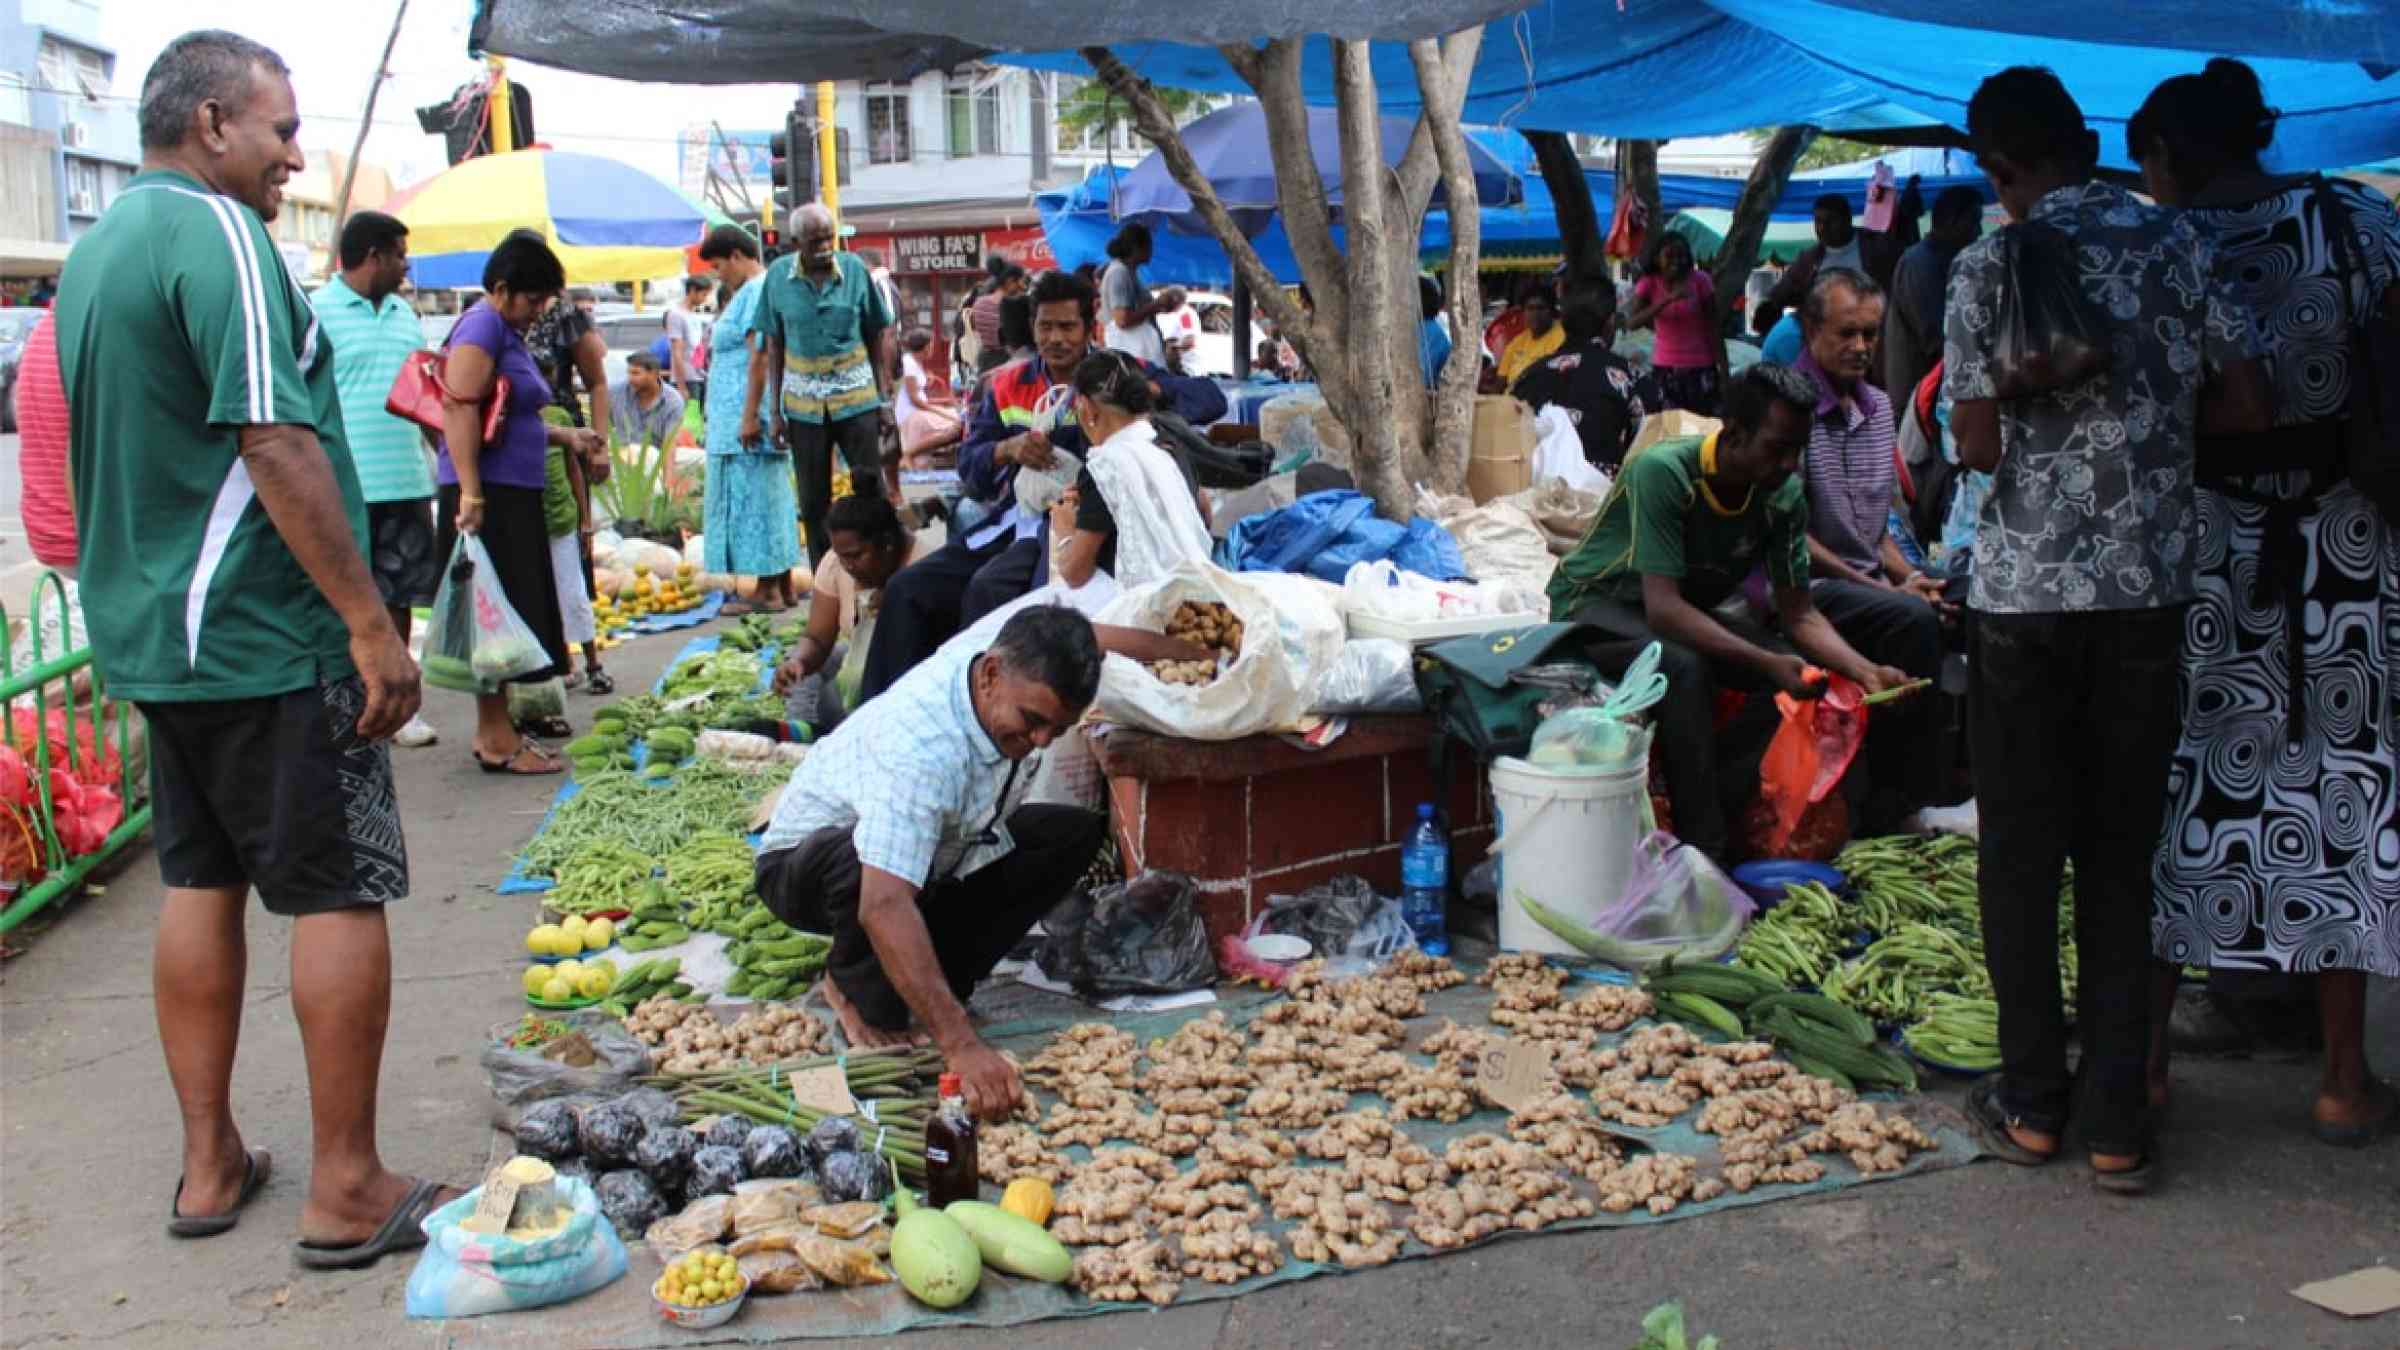 People buying and selling vegetables during the weekend market in Suva, Fiji (2015)